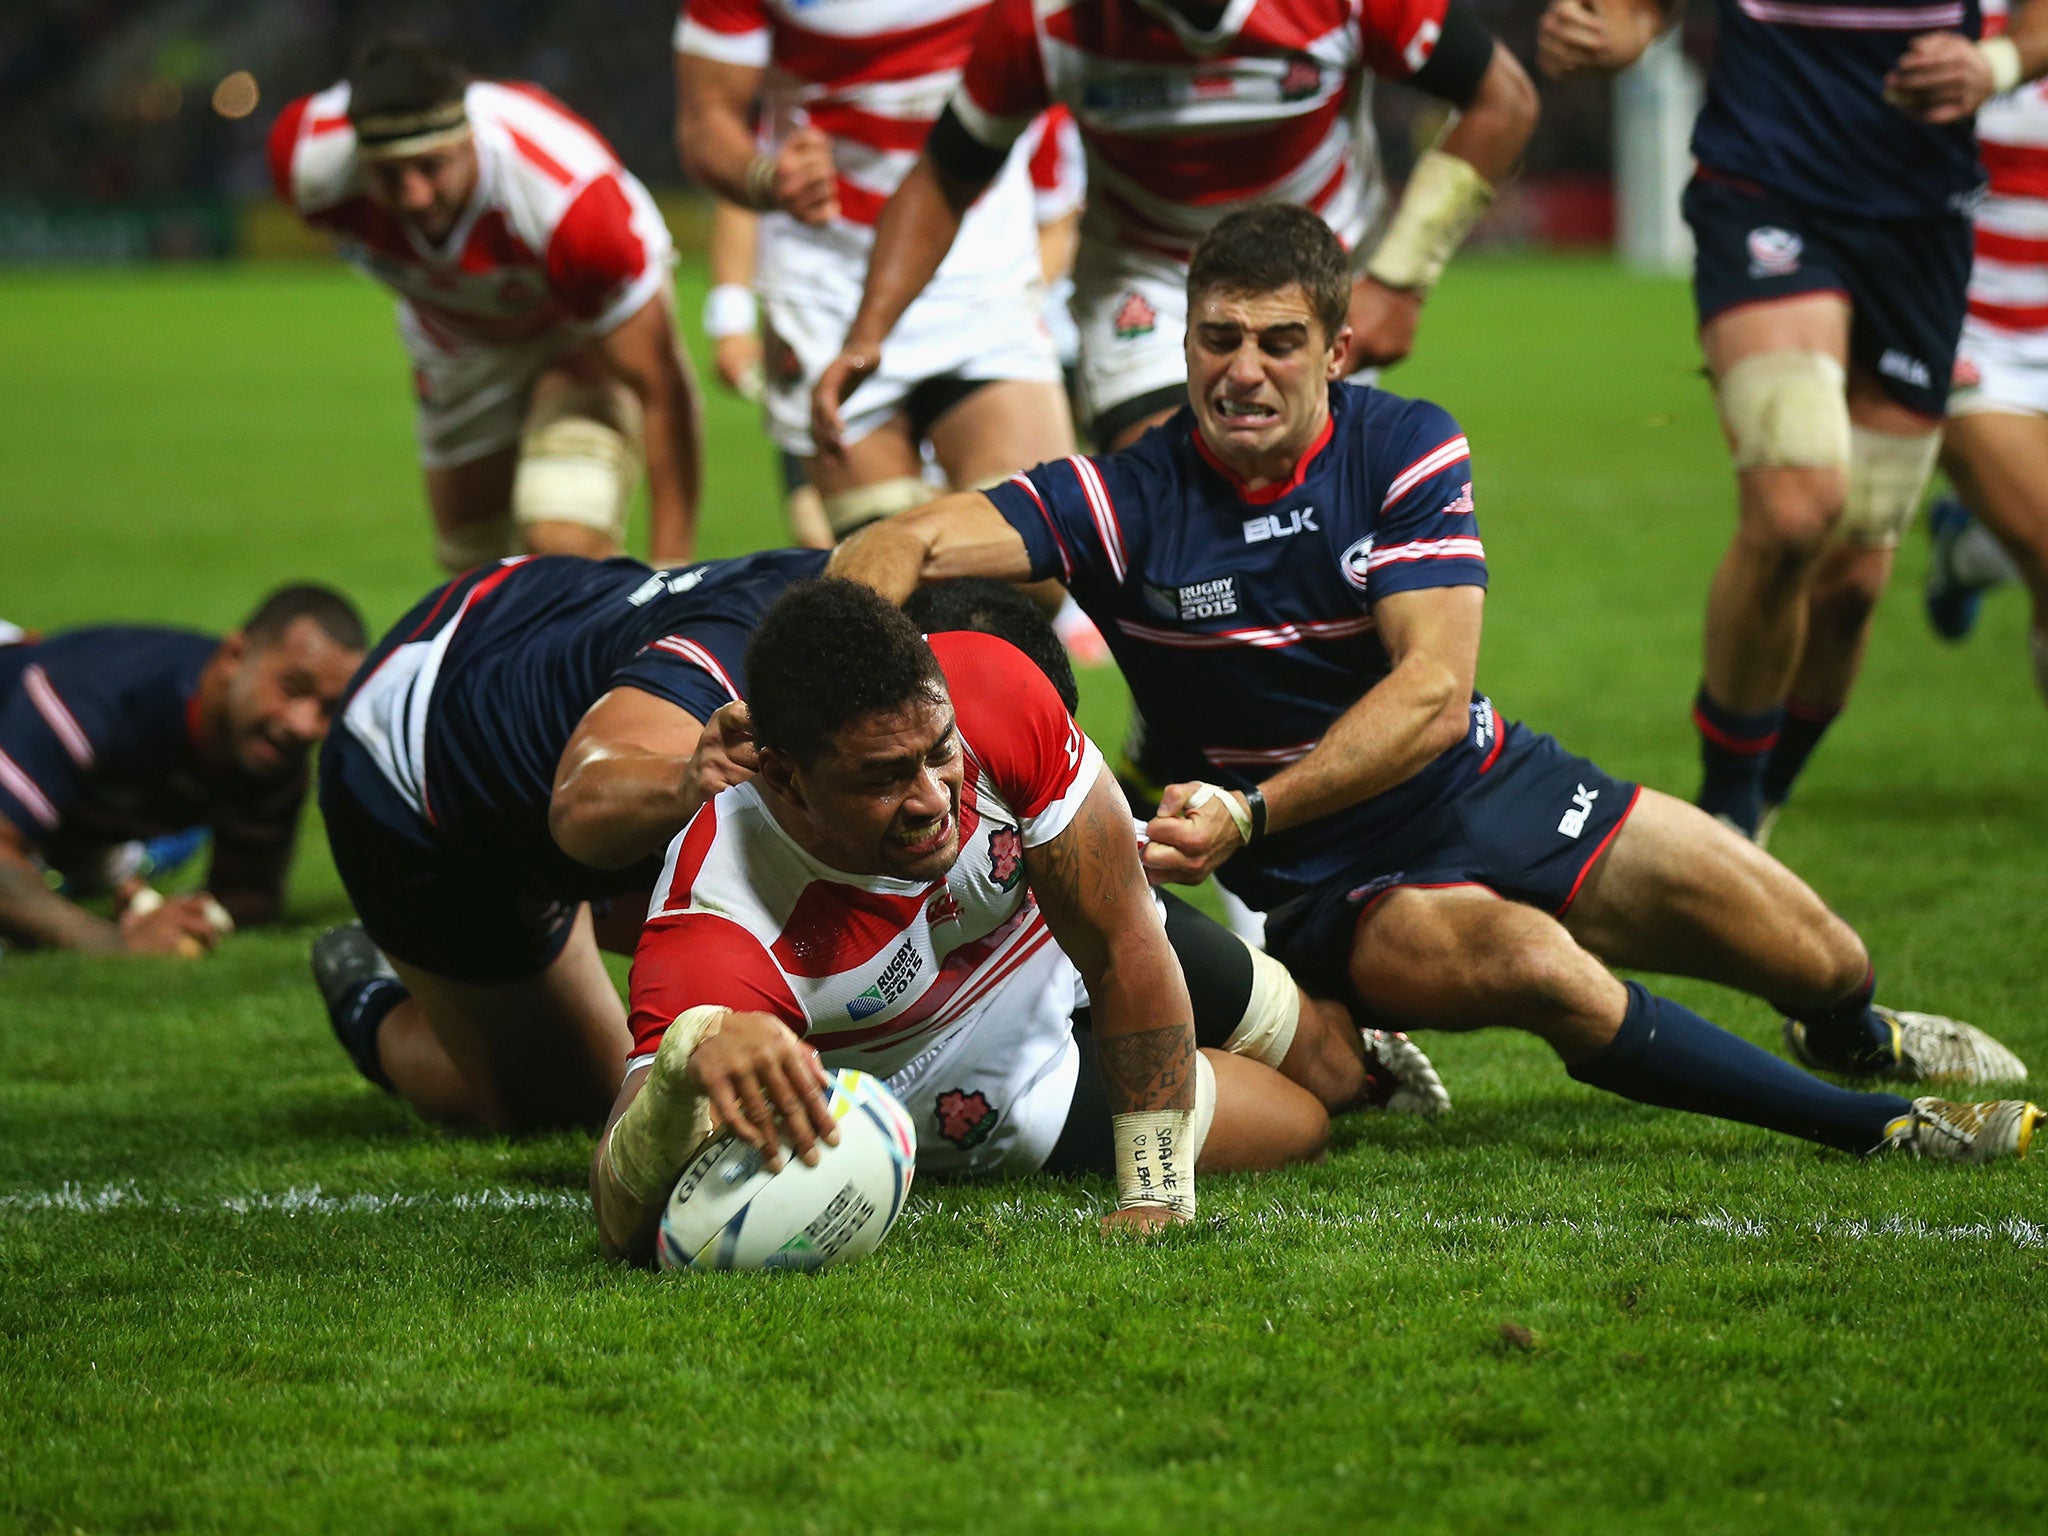 Amanaki Mafi stretches out to score a try for Japan against USA